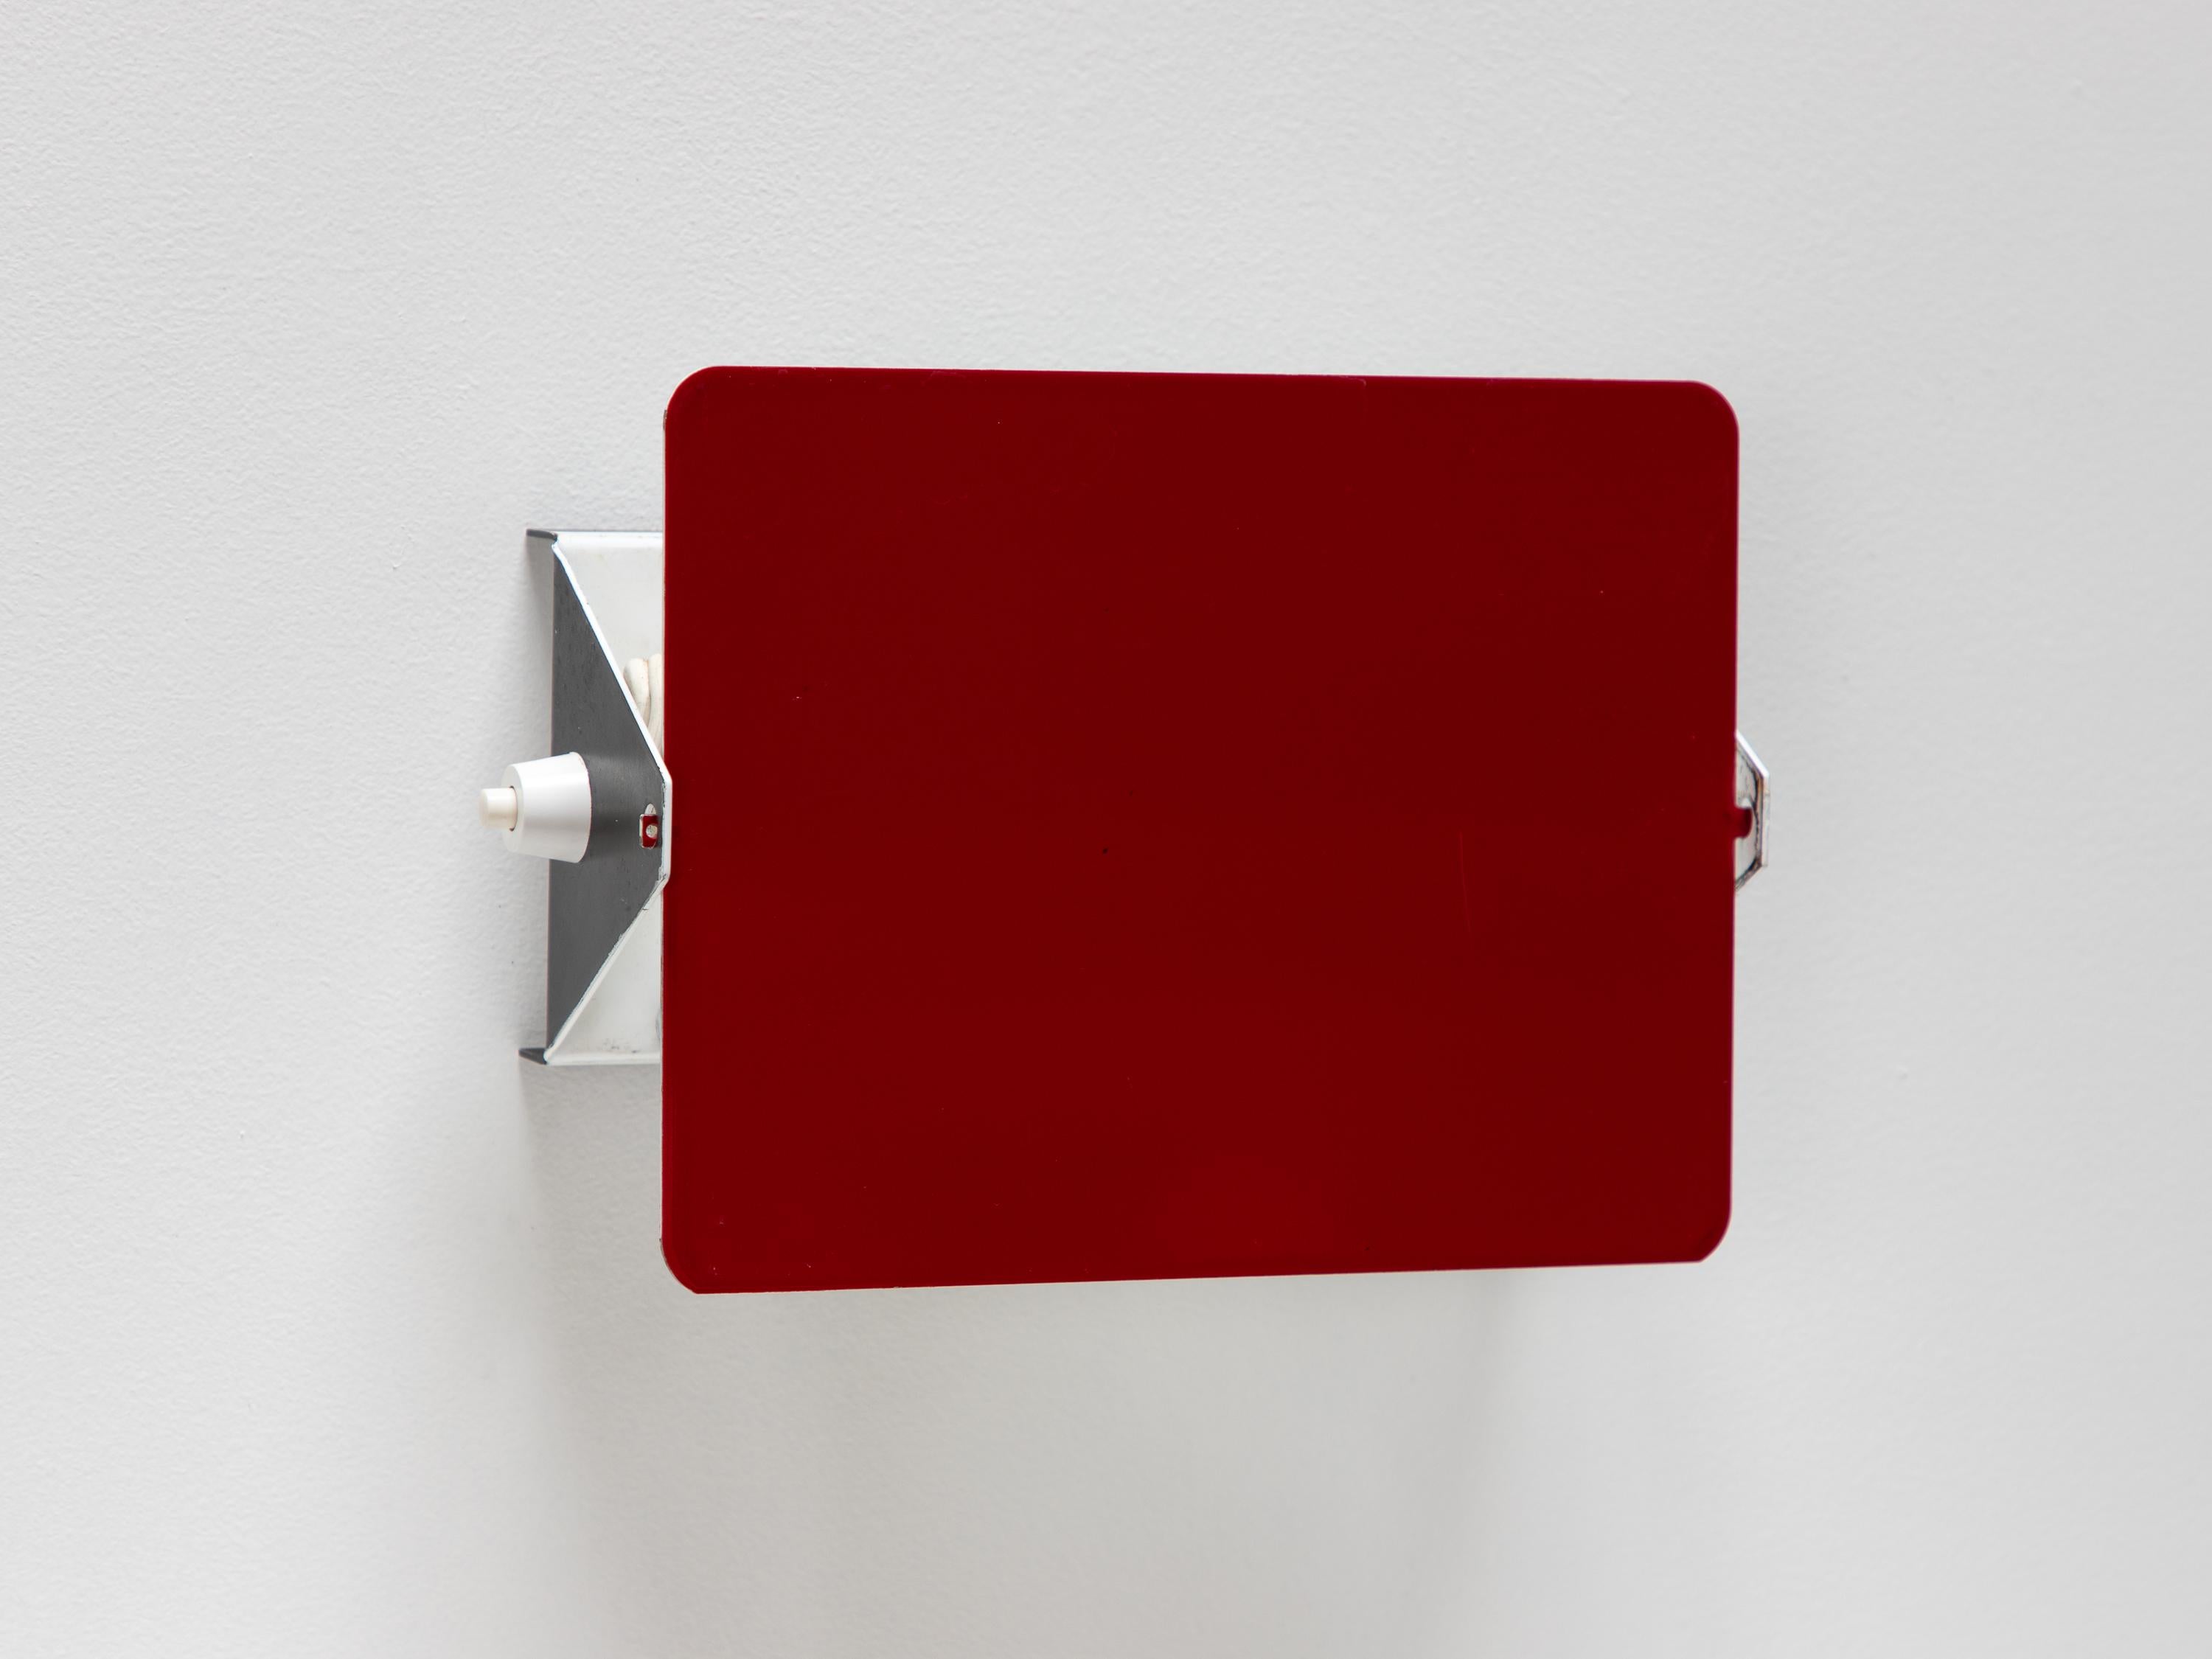 Vintage Charlotte Perriand Les Arcs CP1 Wall Light or Sconces - Crimson Red For Sale 1